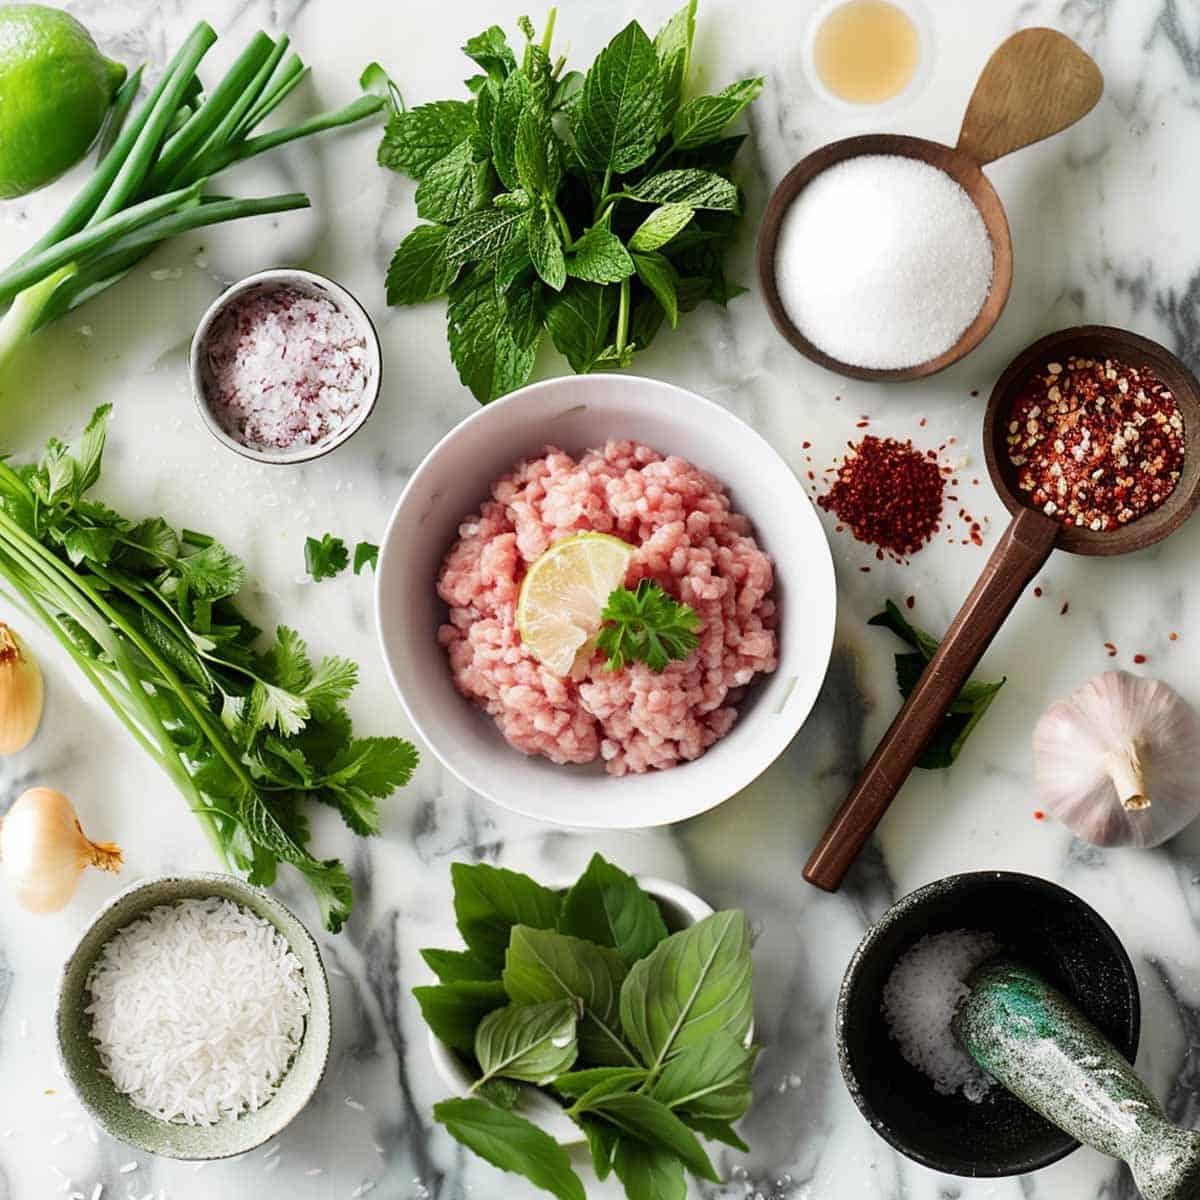 Raw ingredients for Larb, also known as Laab, arranged on a kitchen counter, including minced pork, fresh mint and cilantro leaves, lime wedges, chili flakes, fish sauce, and a small bowl of toasted ground rice.